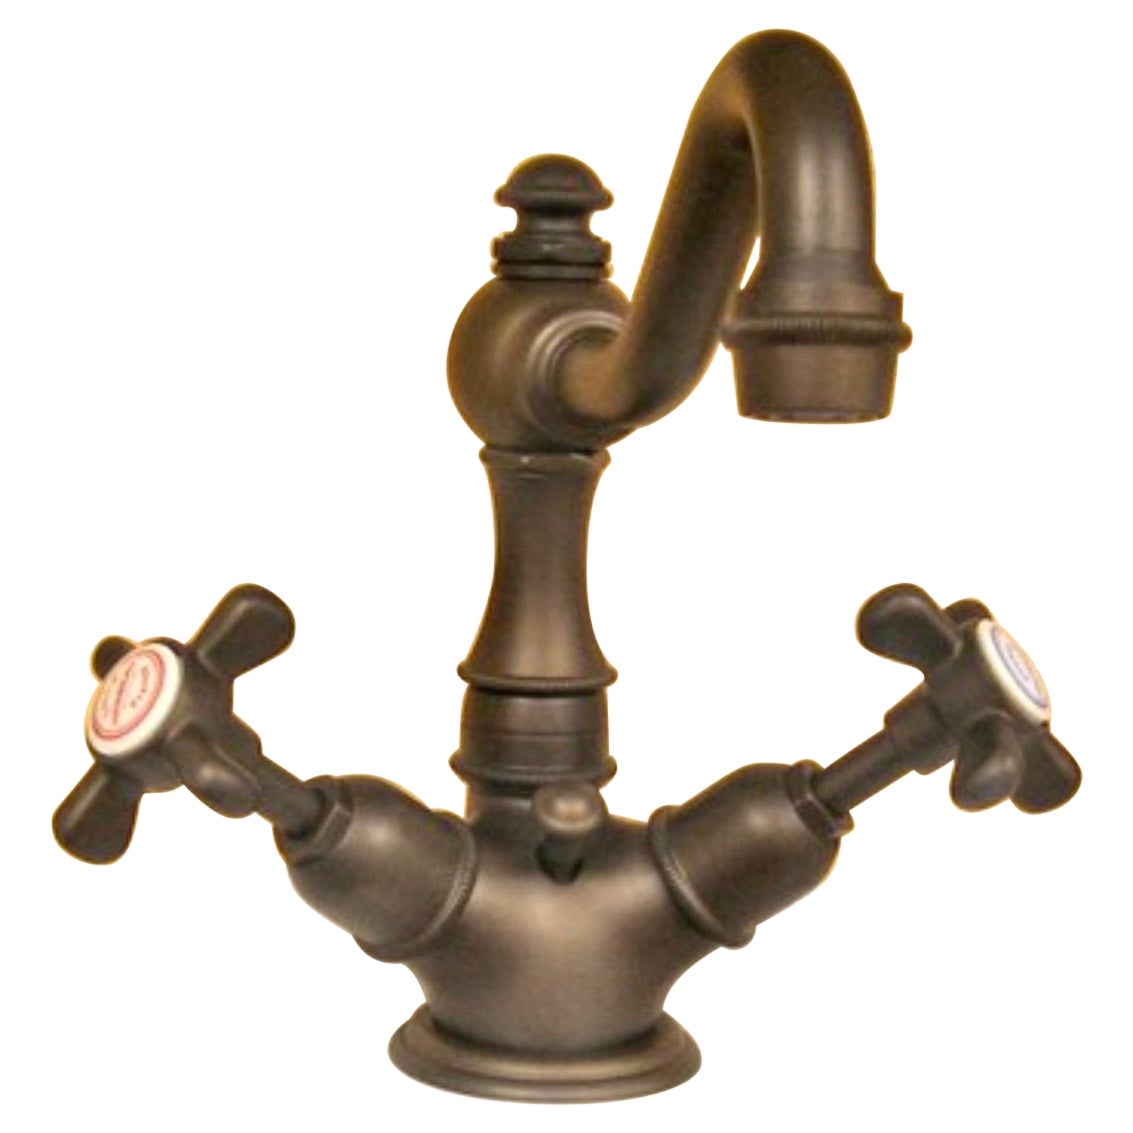 Herbeau France Royale 30001 Single-hole Faucet Mixer, Weathered Brass, France.  